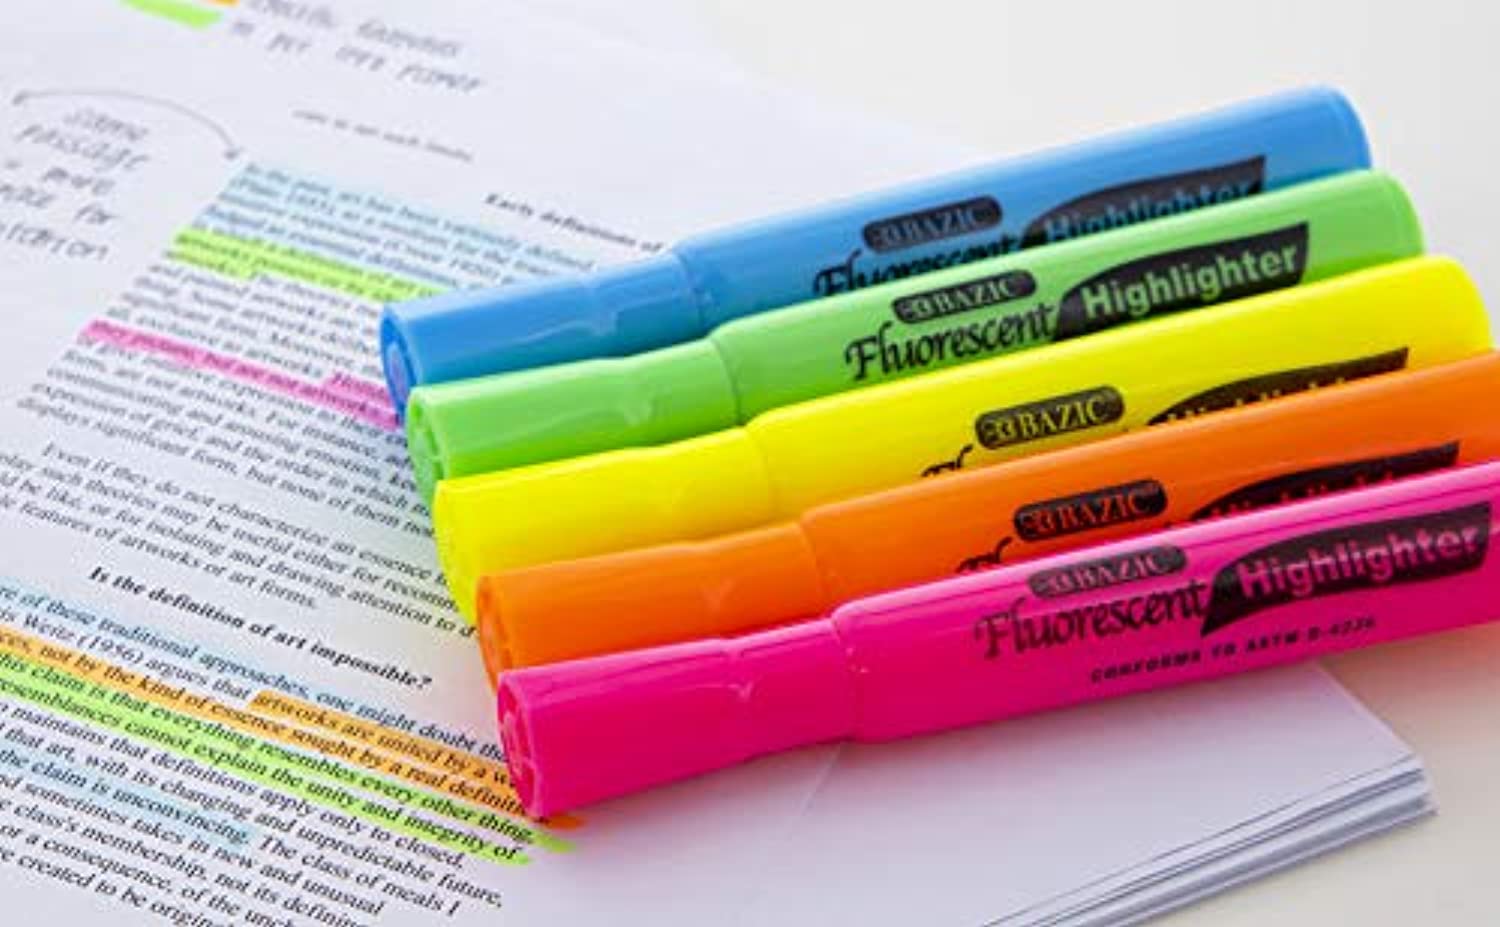 Assorted Colors DAssorted Colors Desk Style Neon Highlighters, Unscented Quick Dry (3/Pack)esk Style Neon Highlighters, Unscented Quick Dry (12/Box)